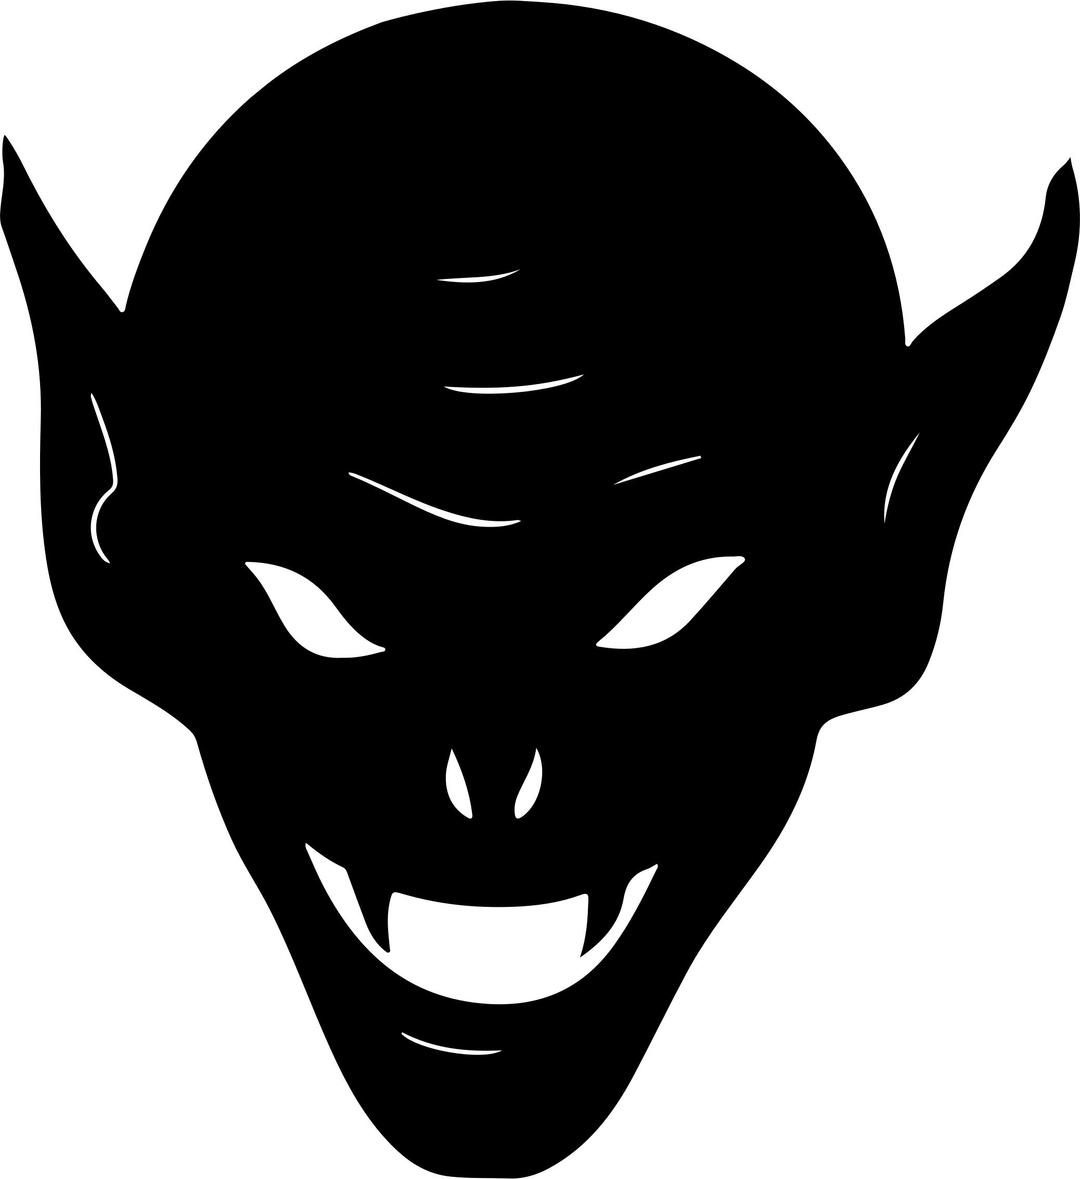 Goblin Head Silhouette png transparent